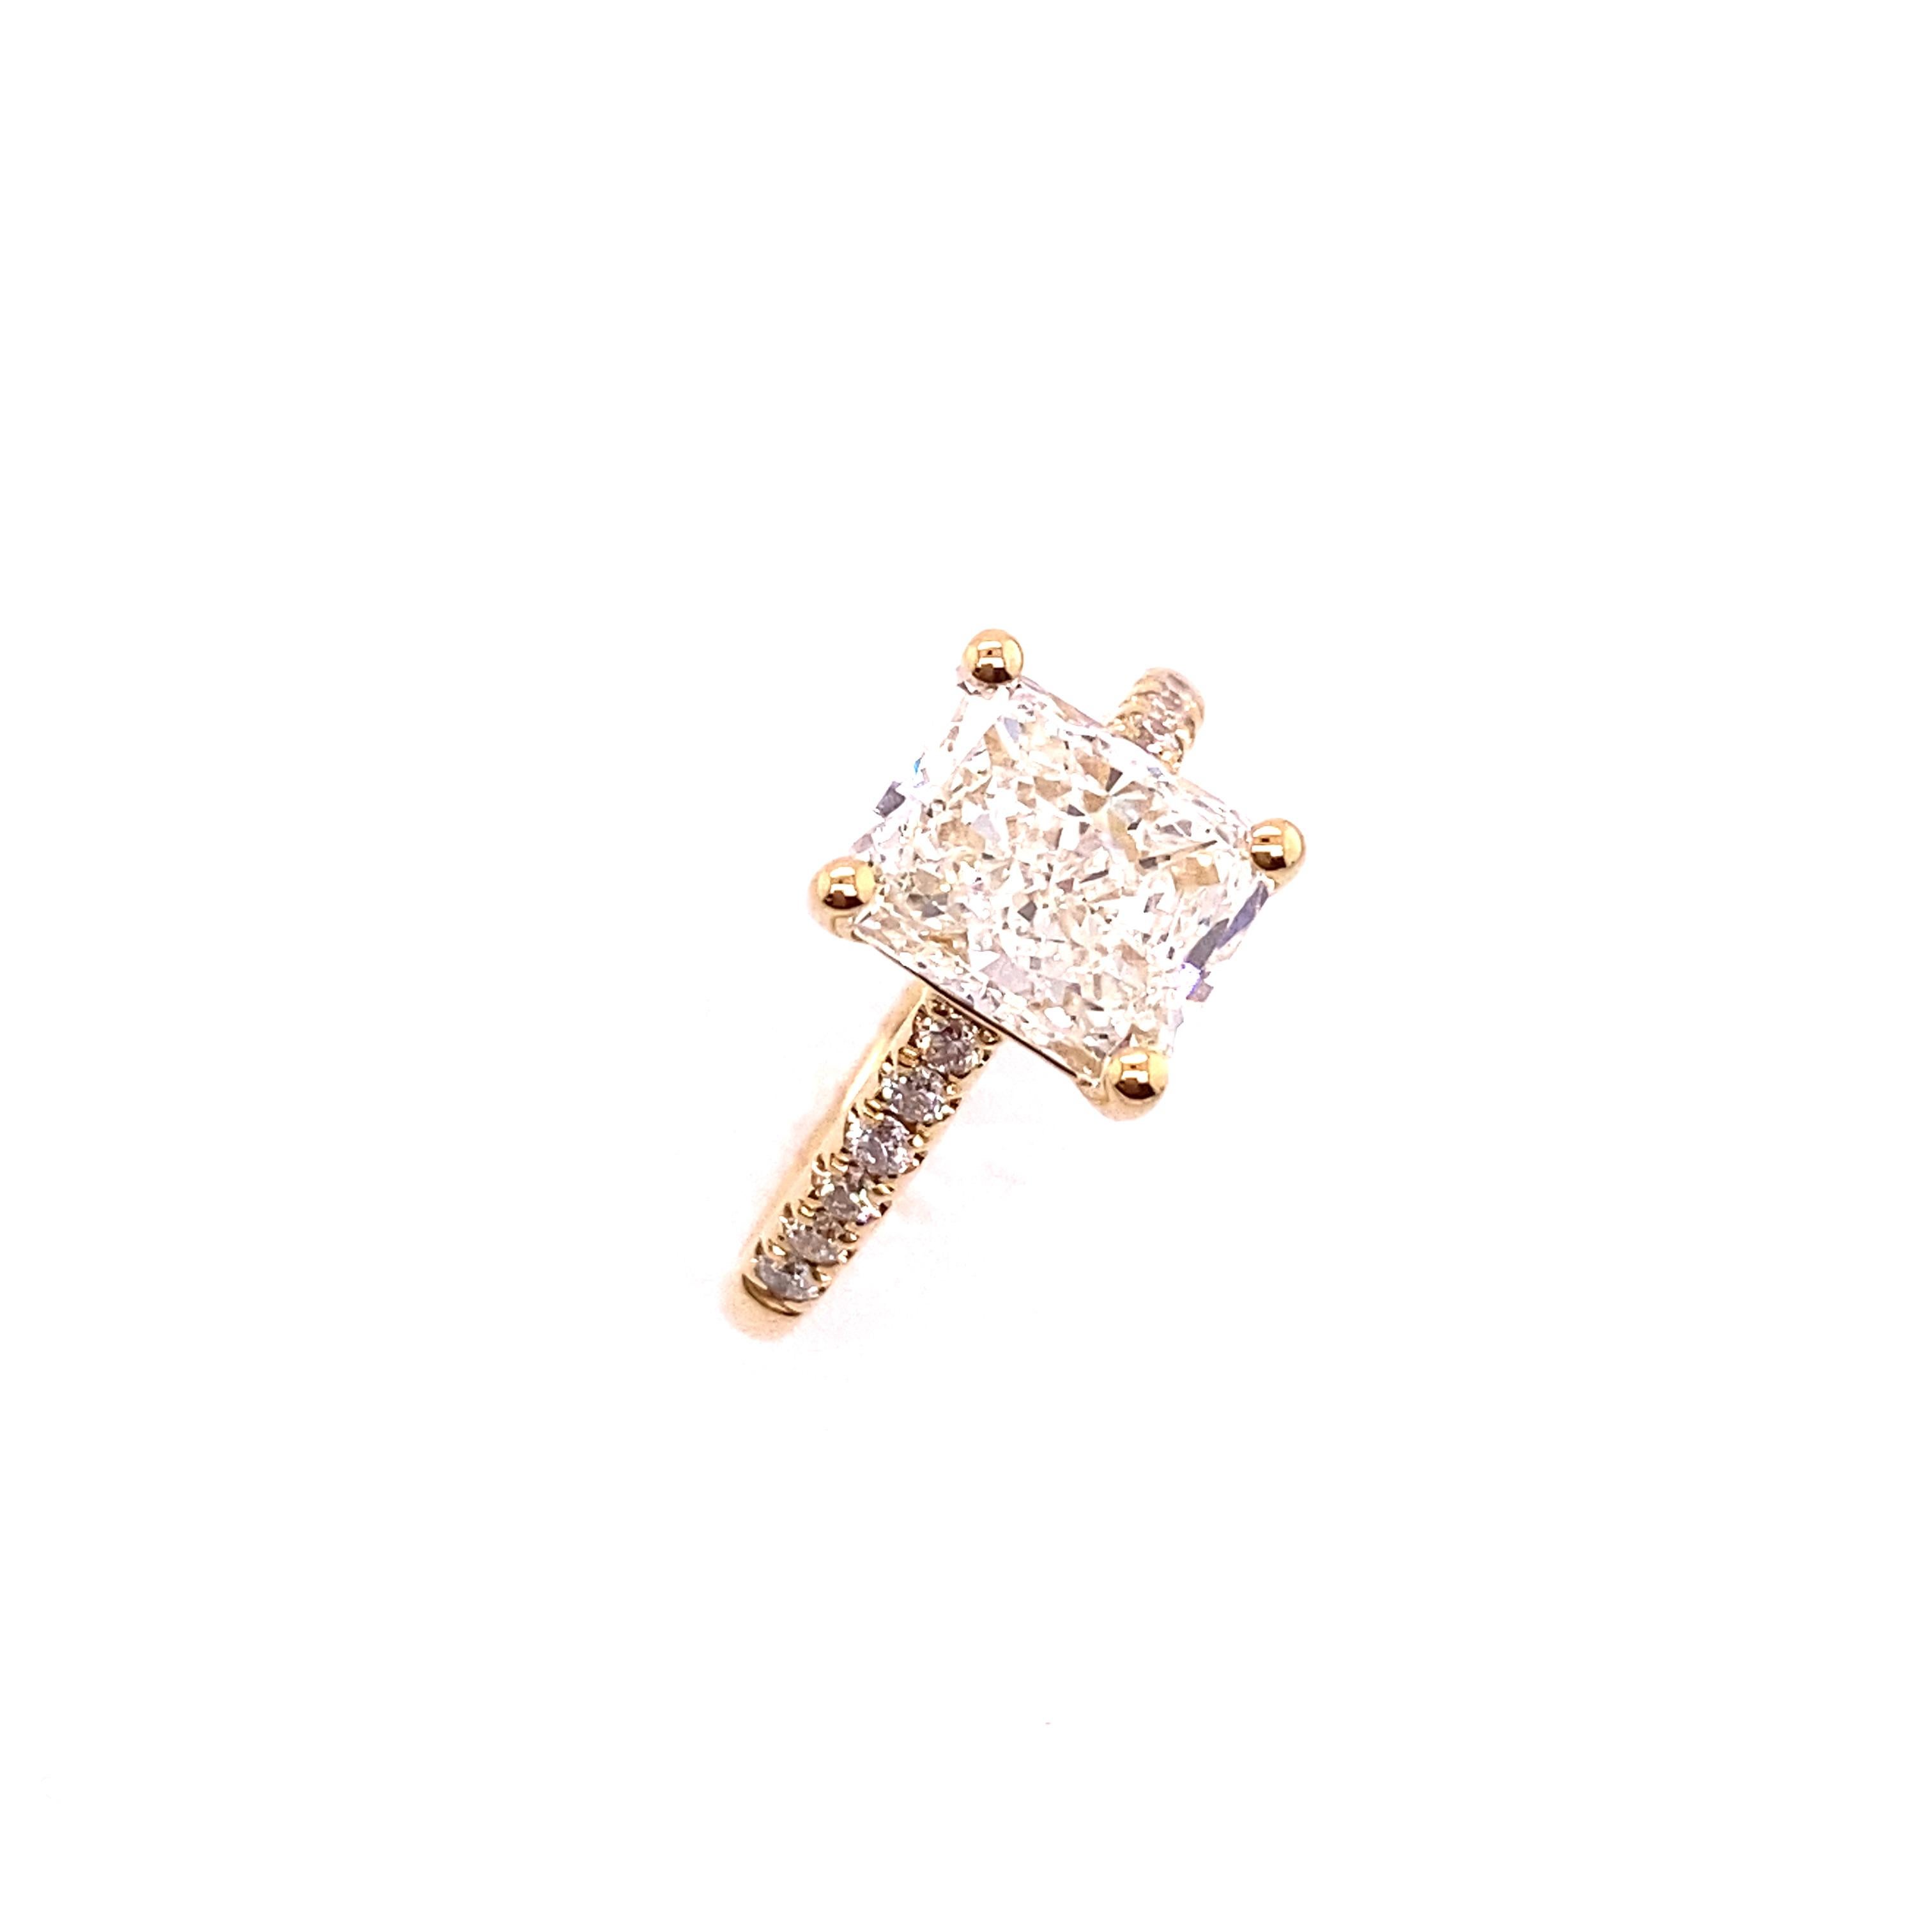 This solitaire diamond ring features an impressive 3.01ct  radiant cut GIA diamond that is set on a 18ct yellow gold band  with 0.30ct of round brilliant cut diamonds, that are set on the shoulders of the ring for a unique look.
Total Diamond